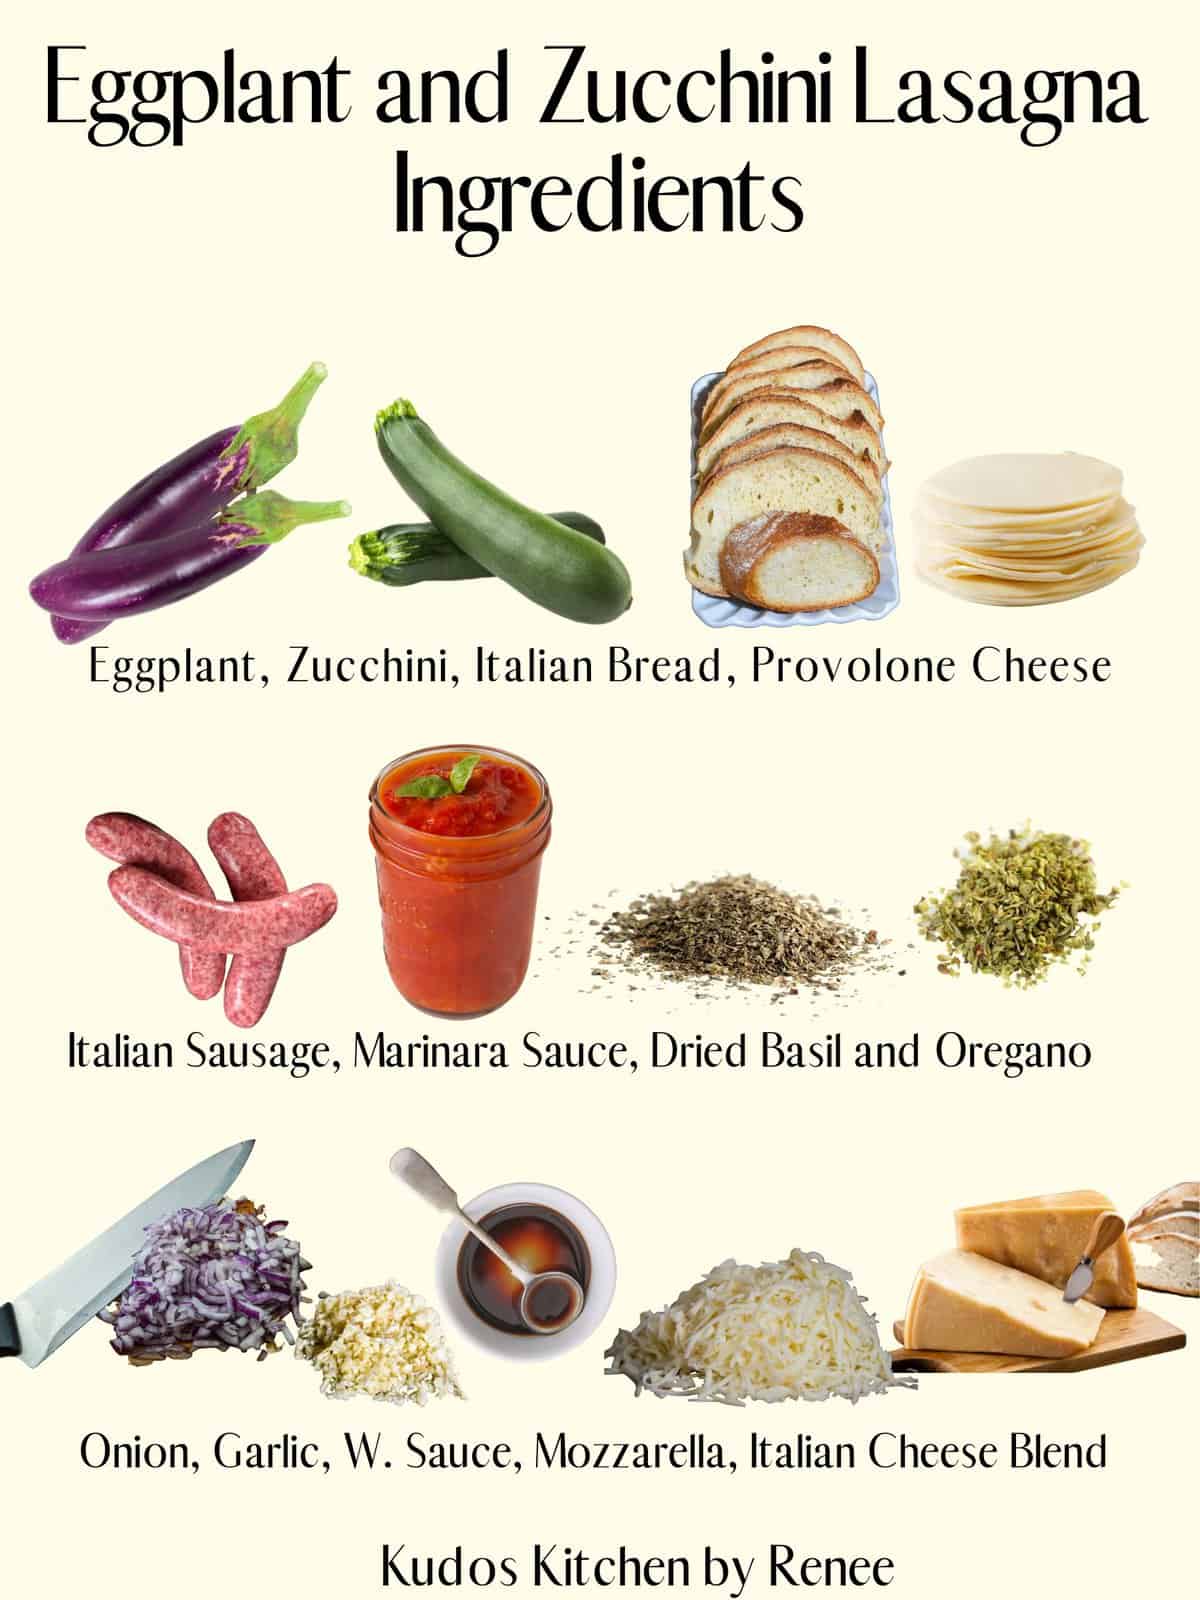 A visual ingredient list for making Eggplant and Zucchini Lasagna.